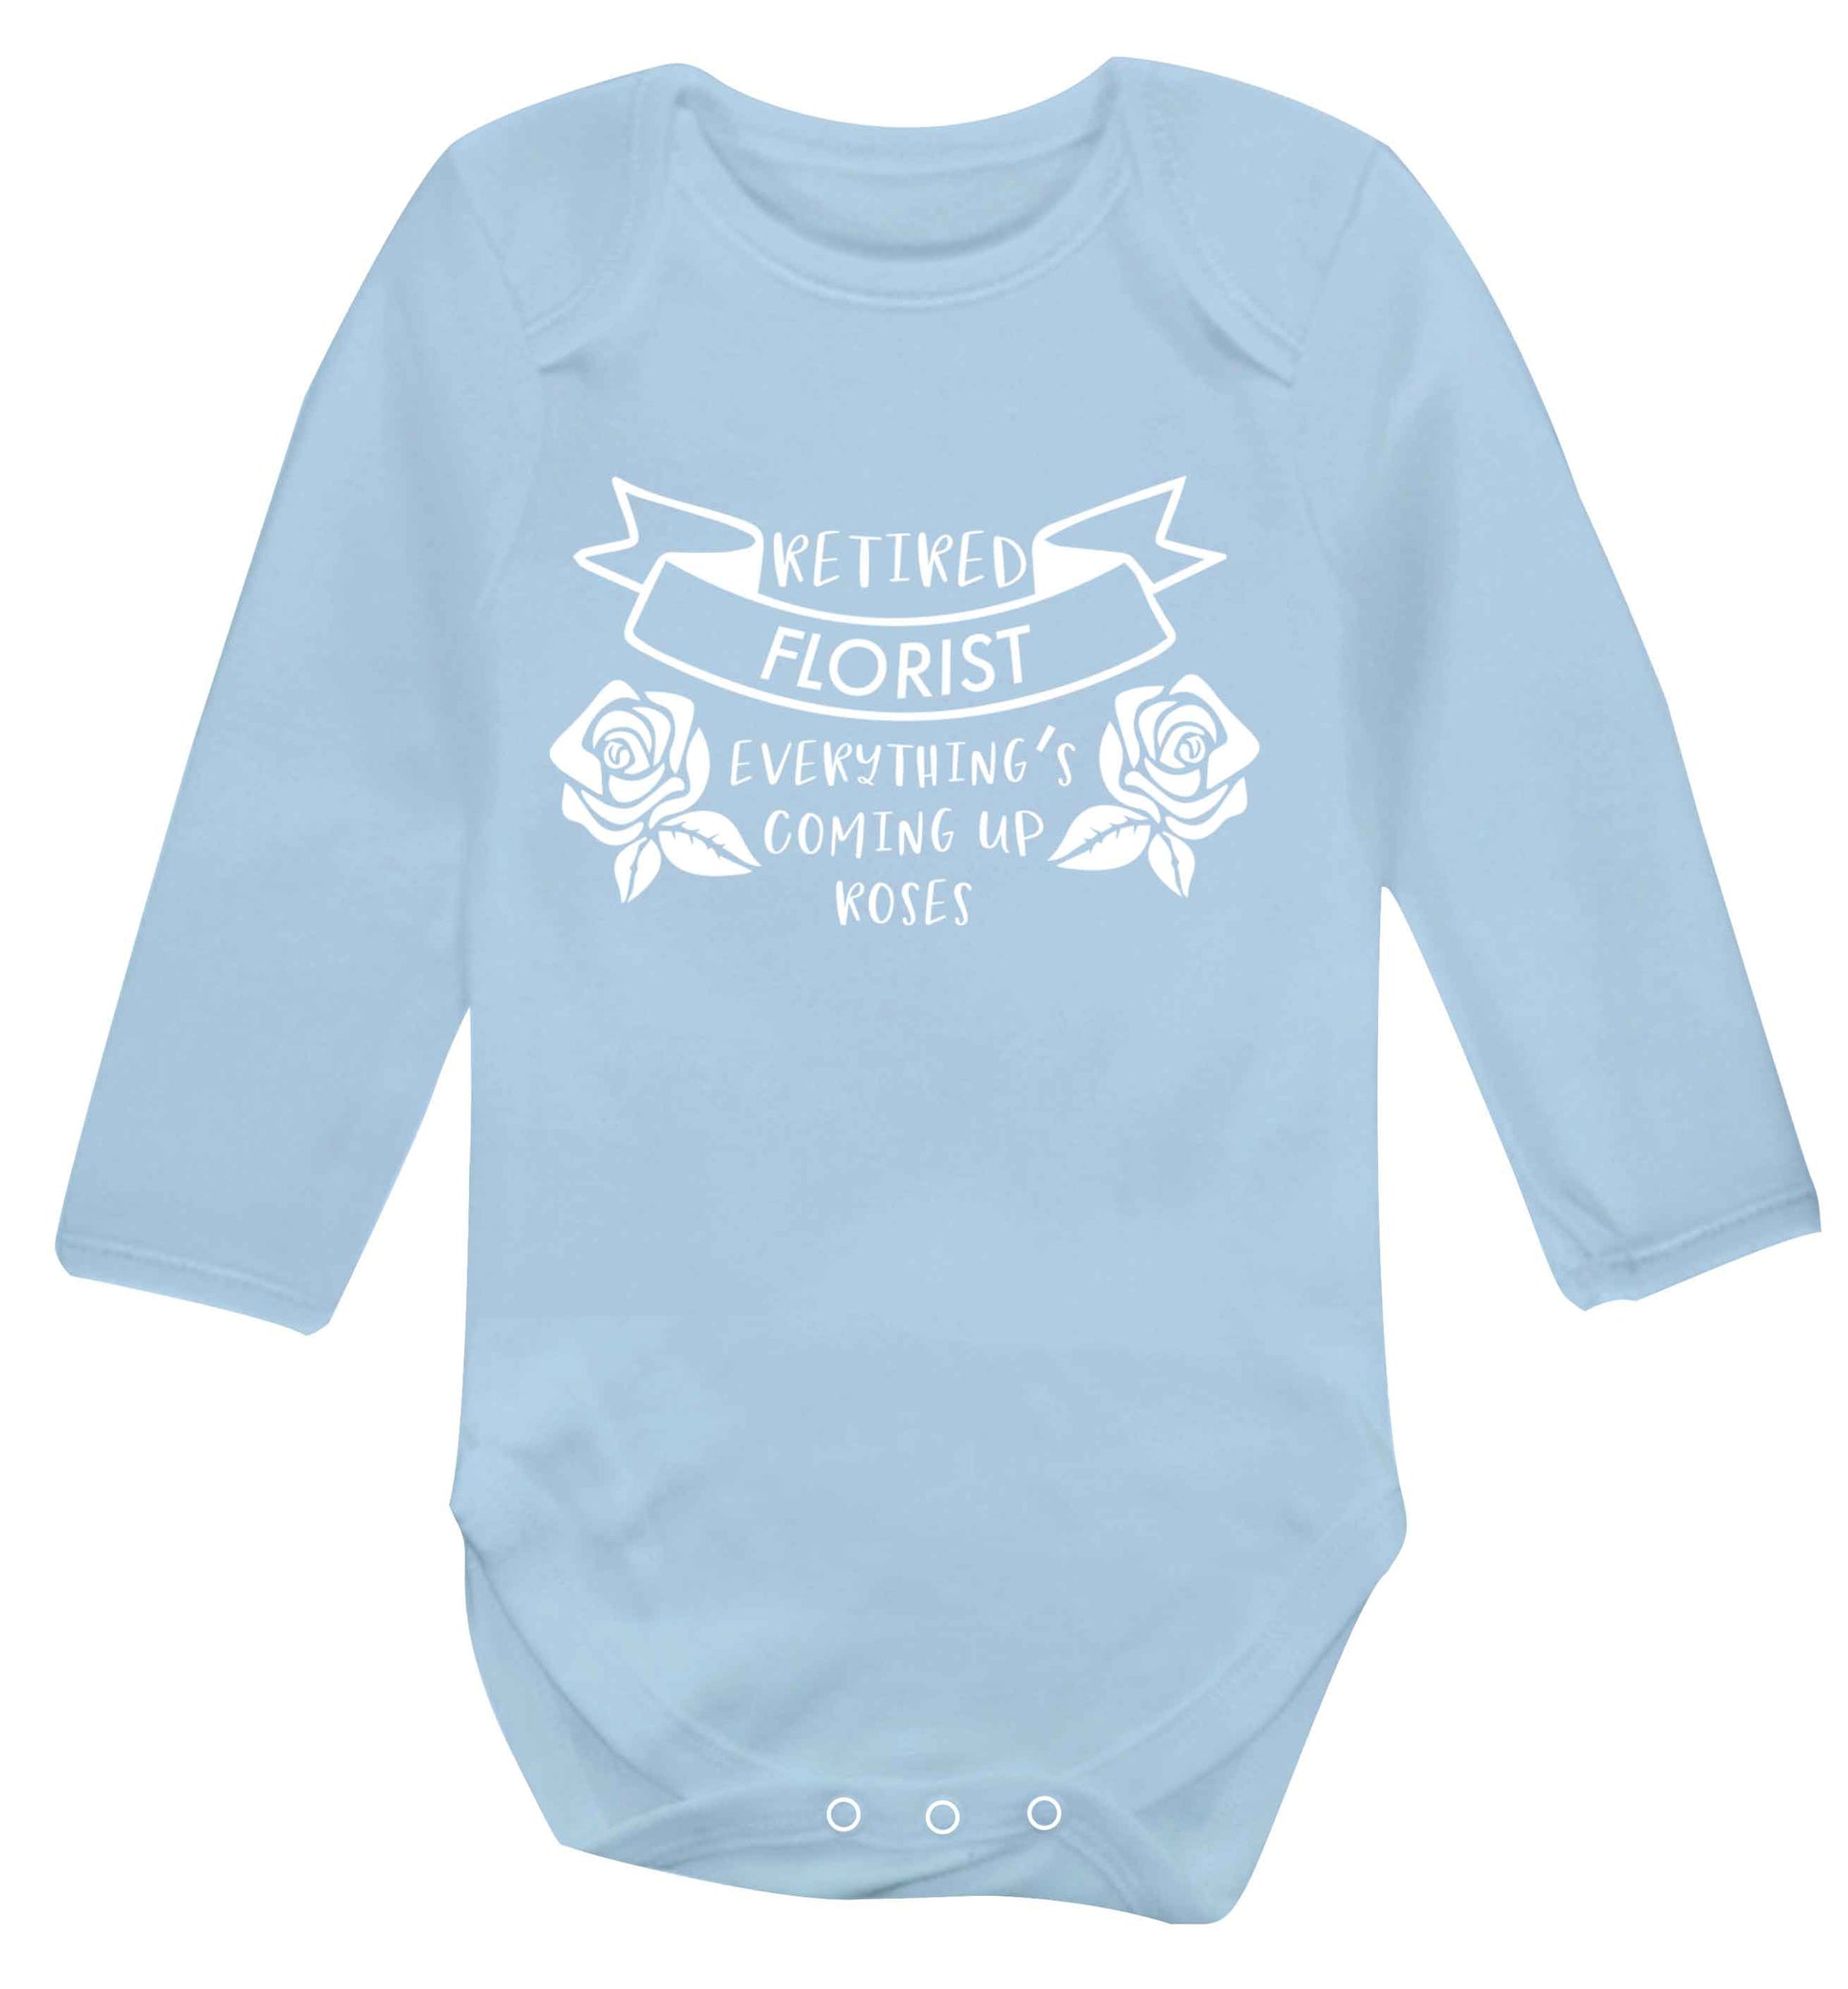 Retired florist everything's coming up roses Baby Vest long sleeved pale blue 6-12 months